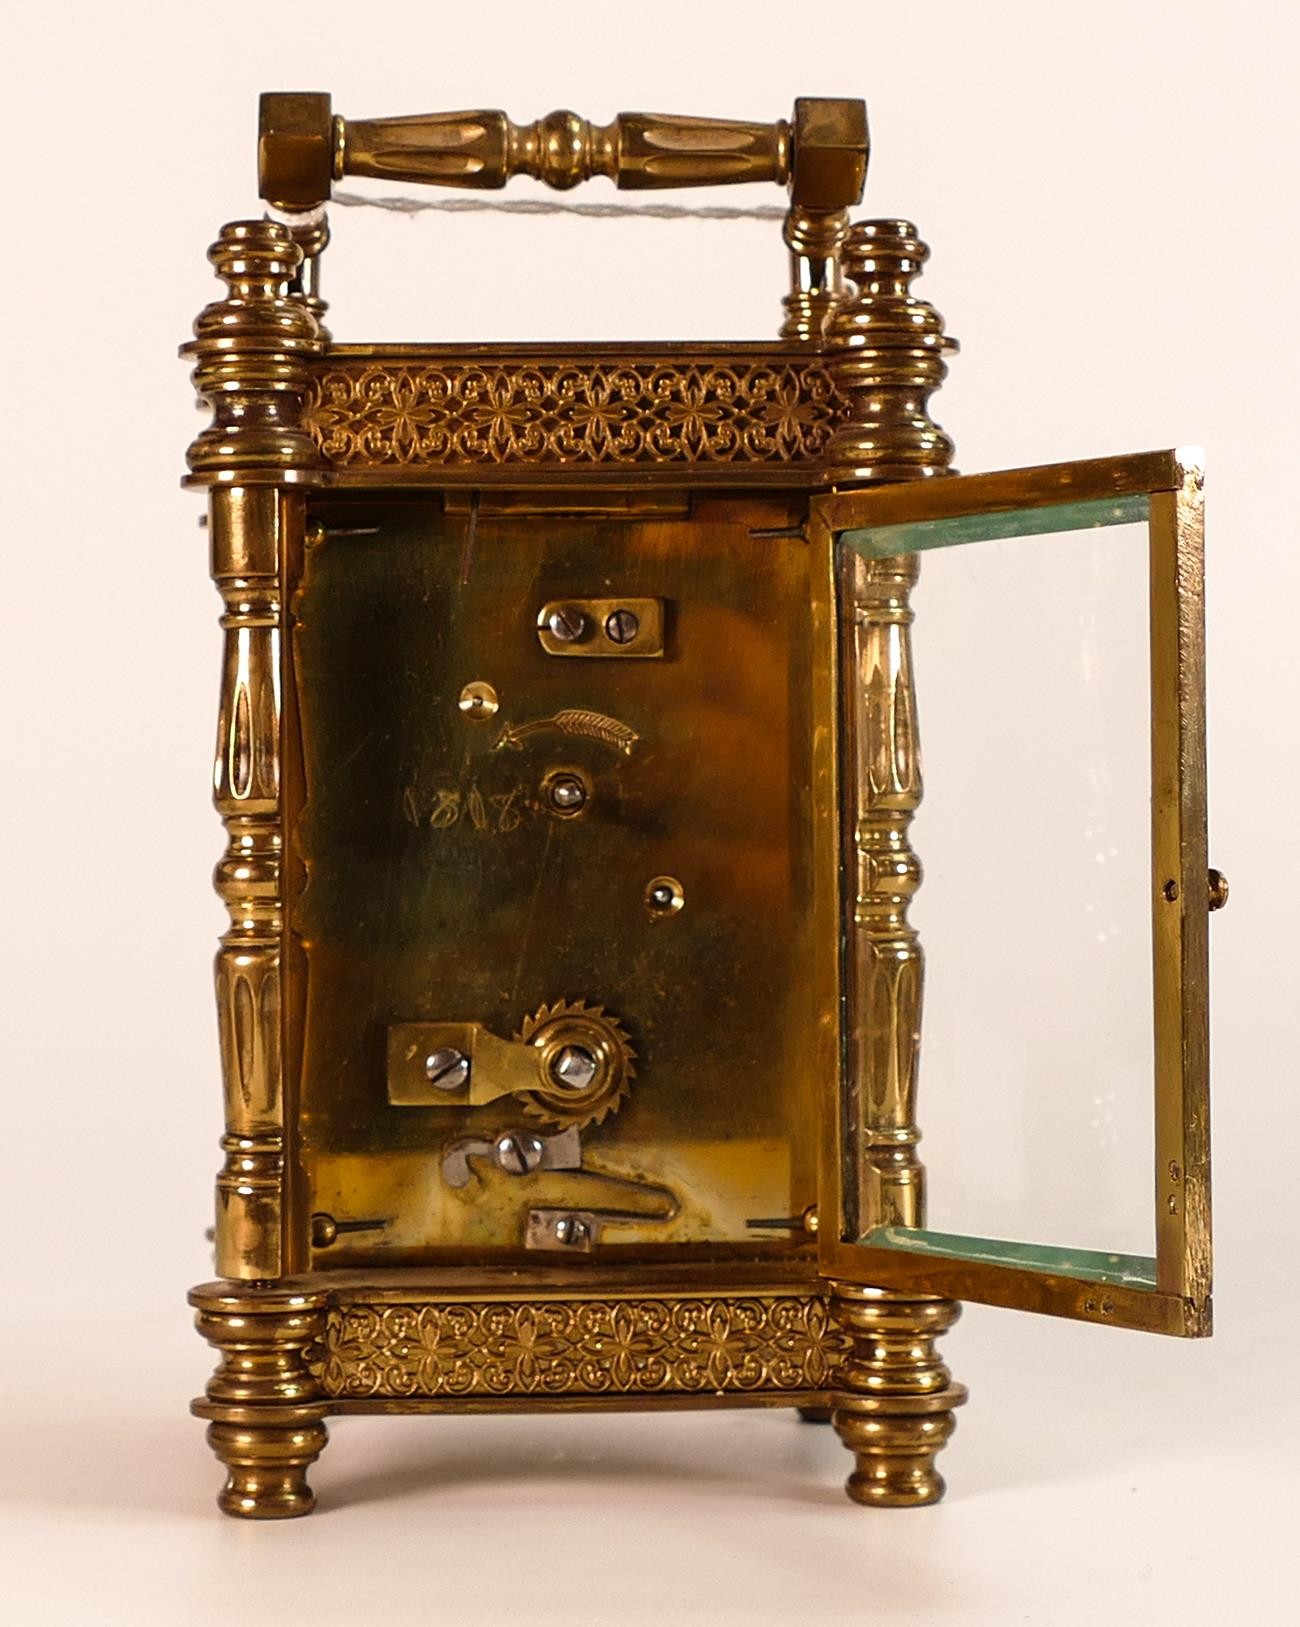 Exceedingly ornate brass carriage clock, late 19th century, no key, sold as not working. 15cm high - Image 4 of 6